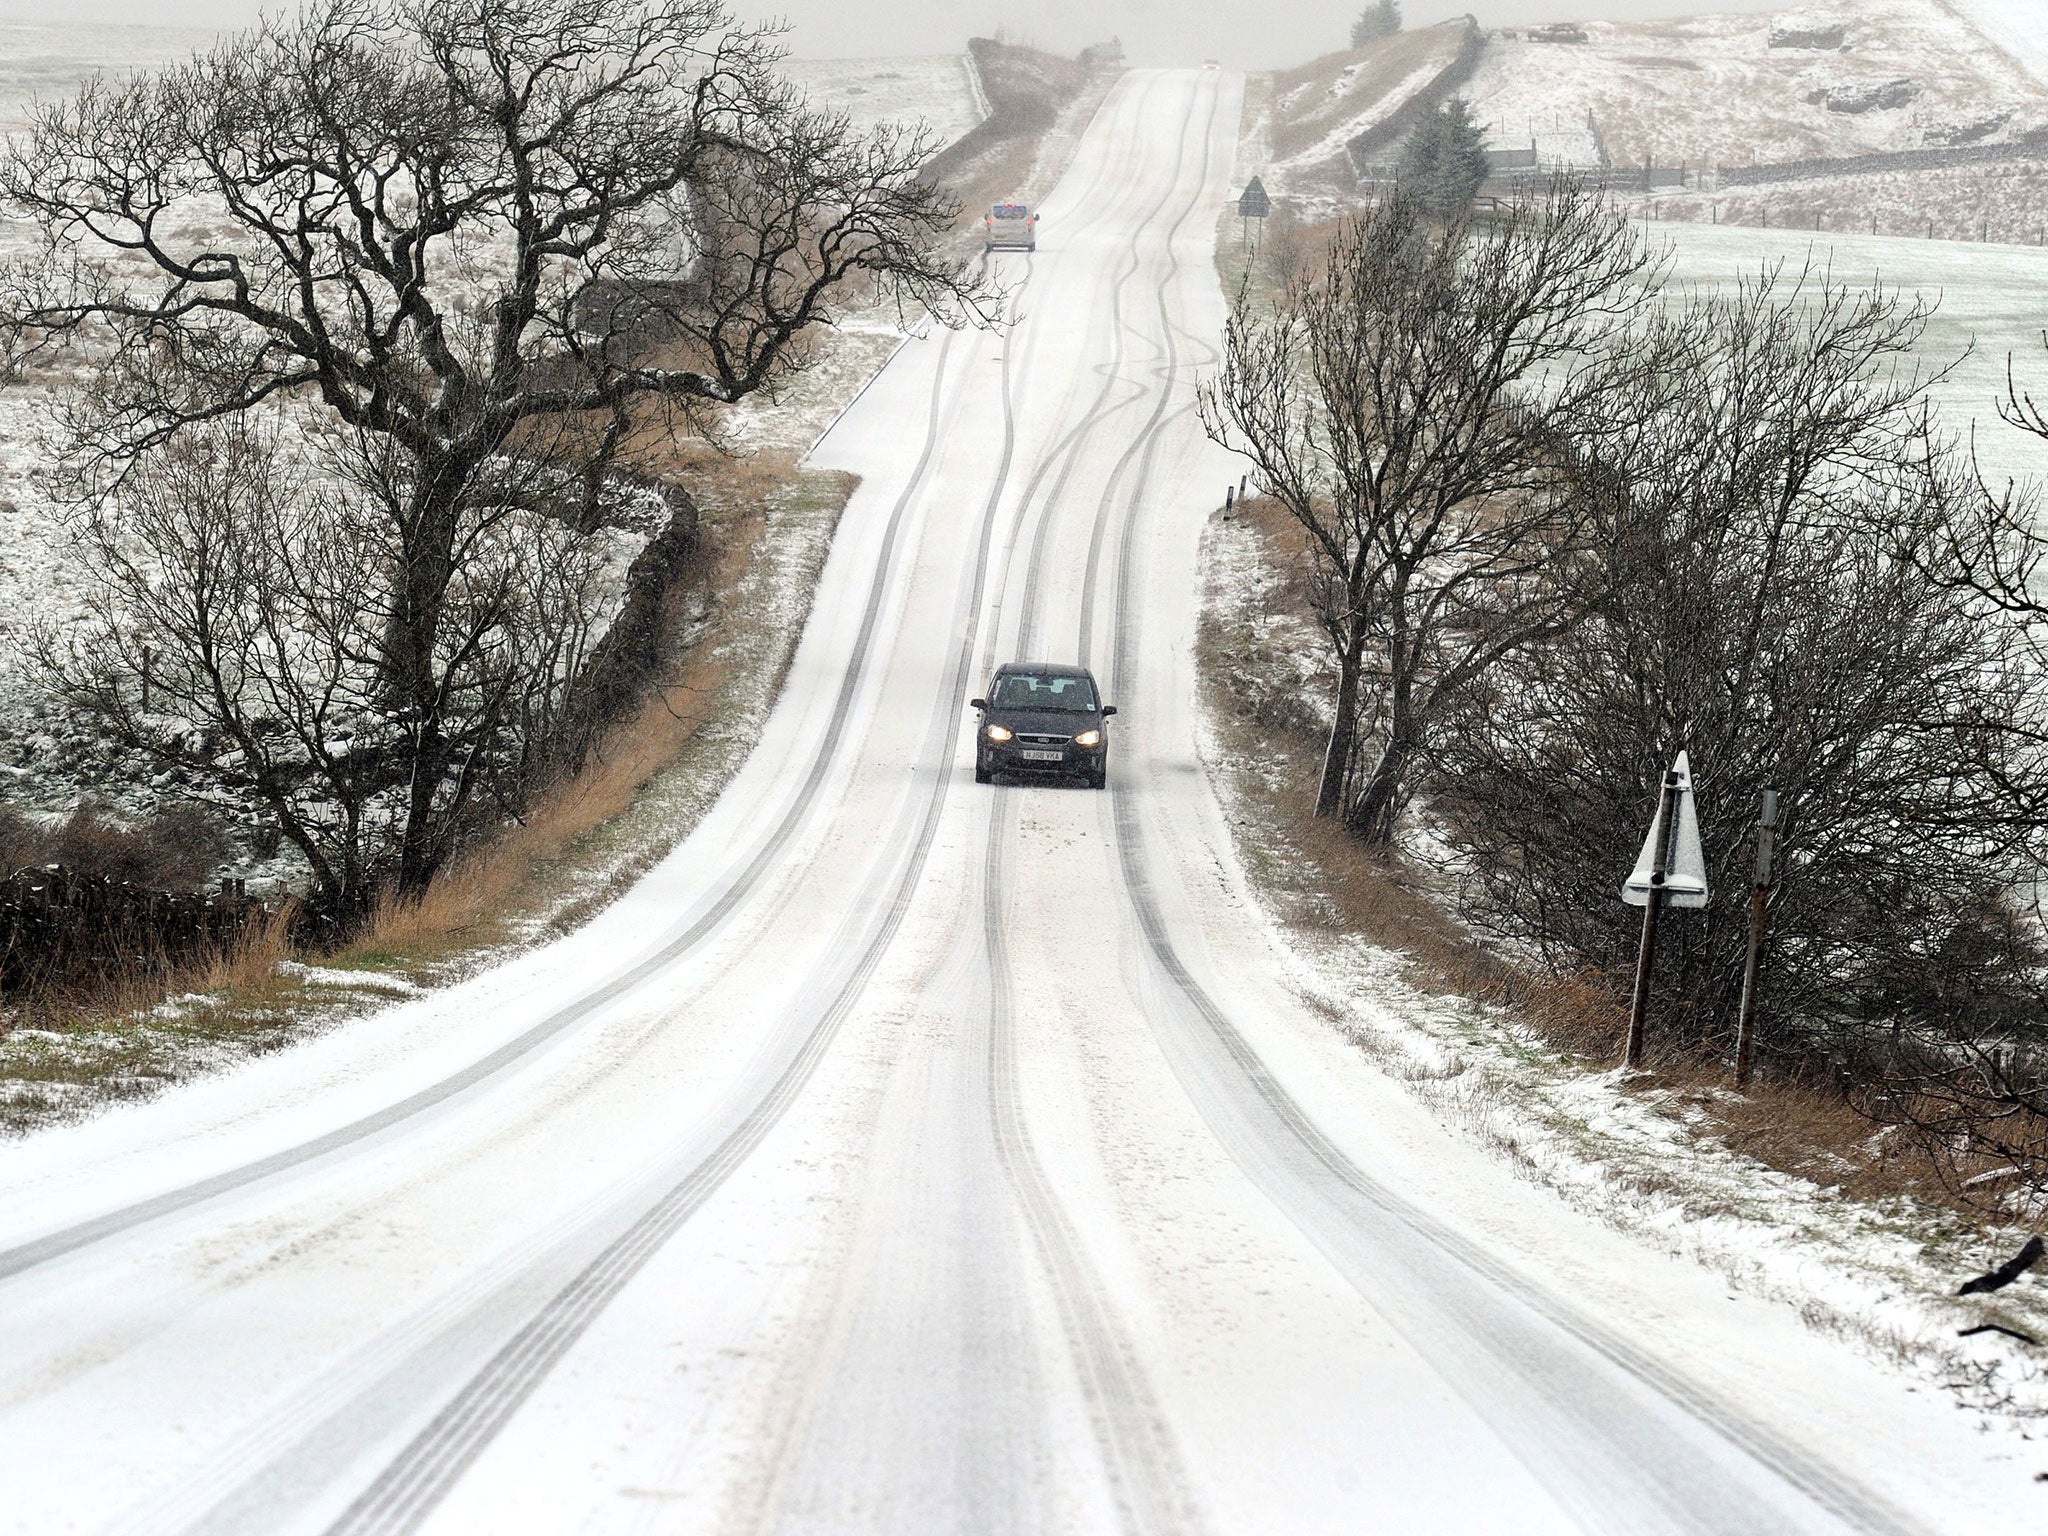 The Met Office said rain arriving in western areas will turn to snow as it comes inland